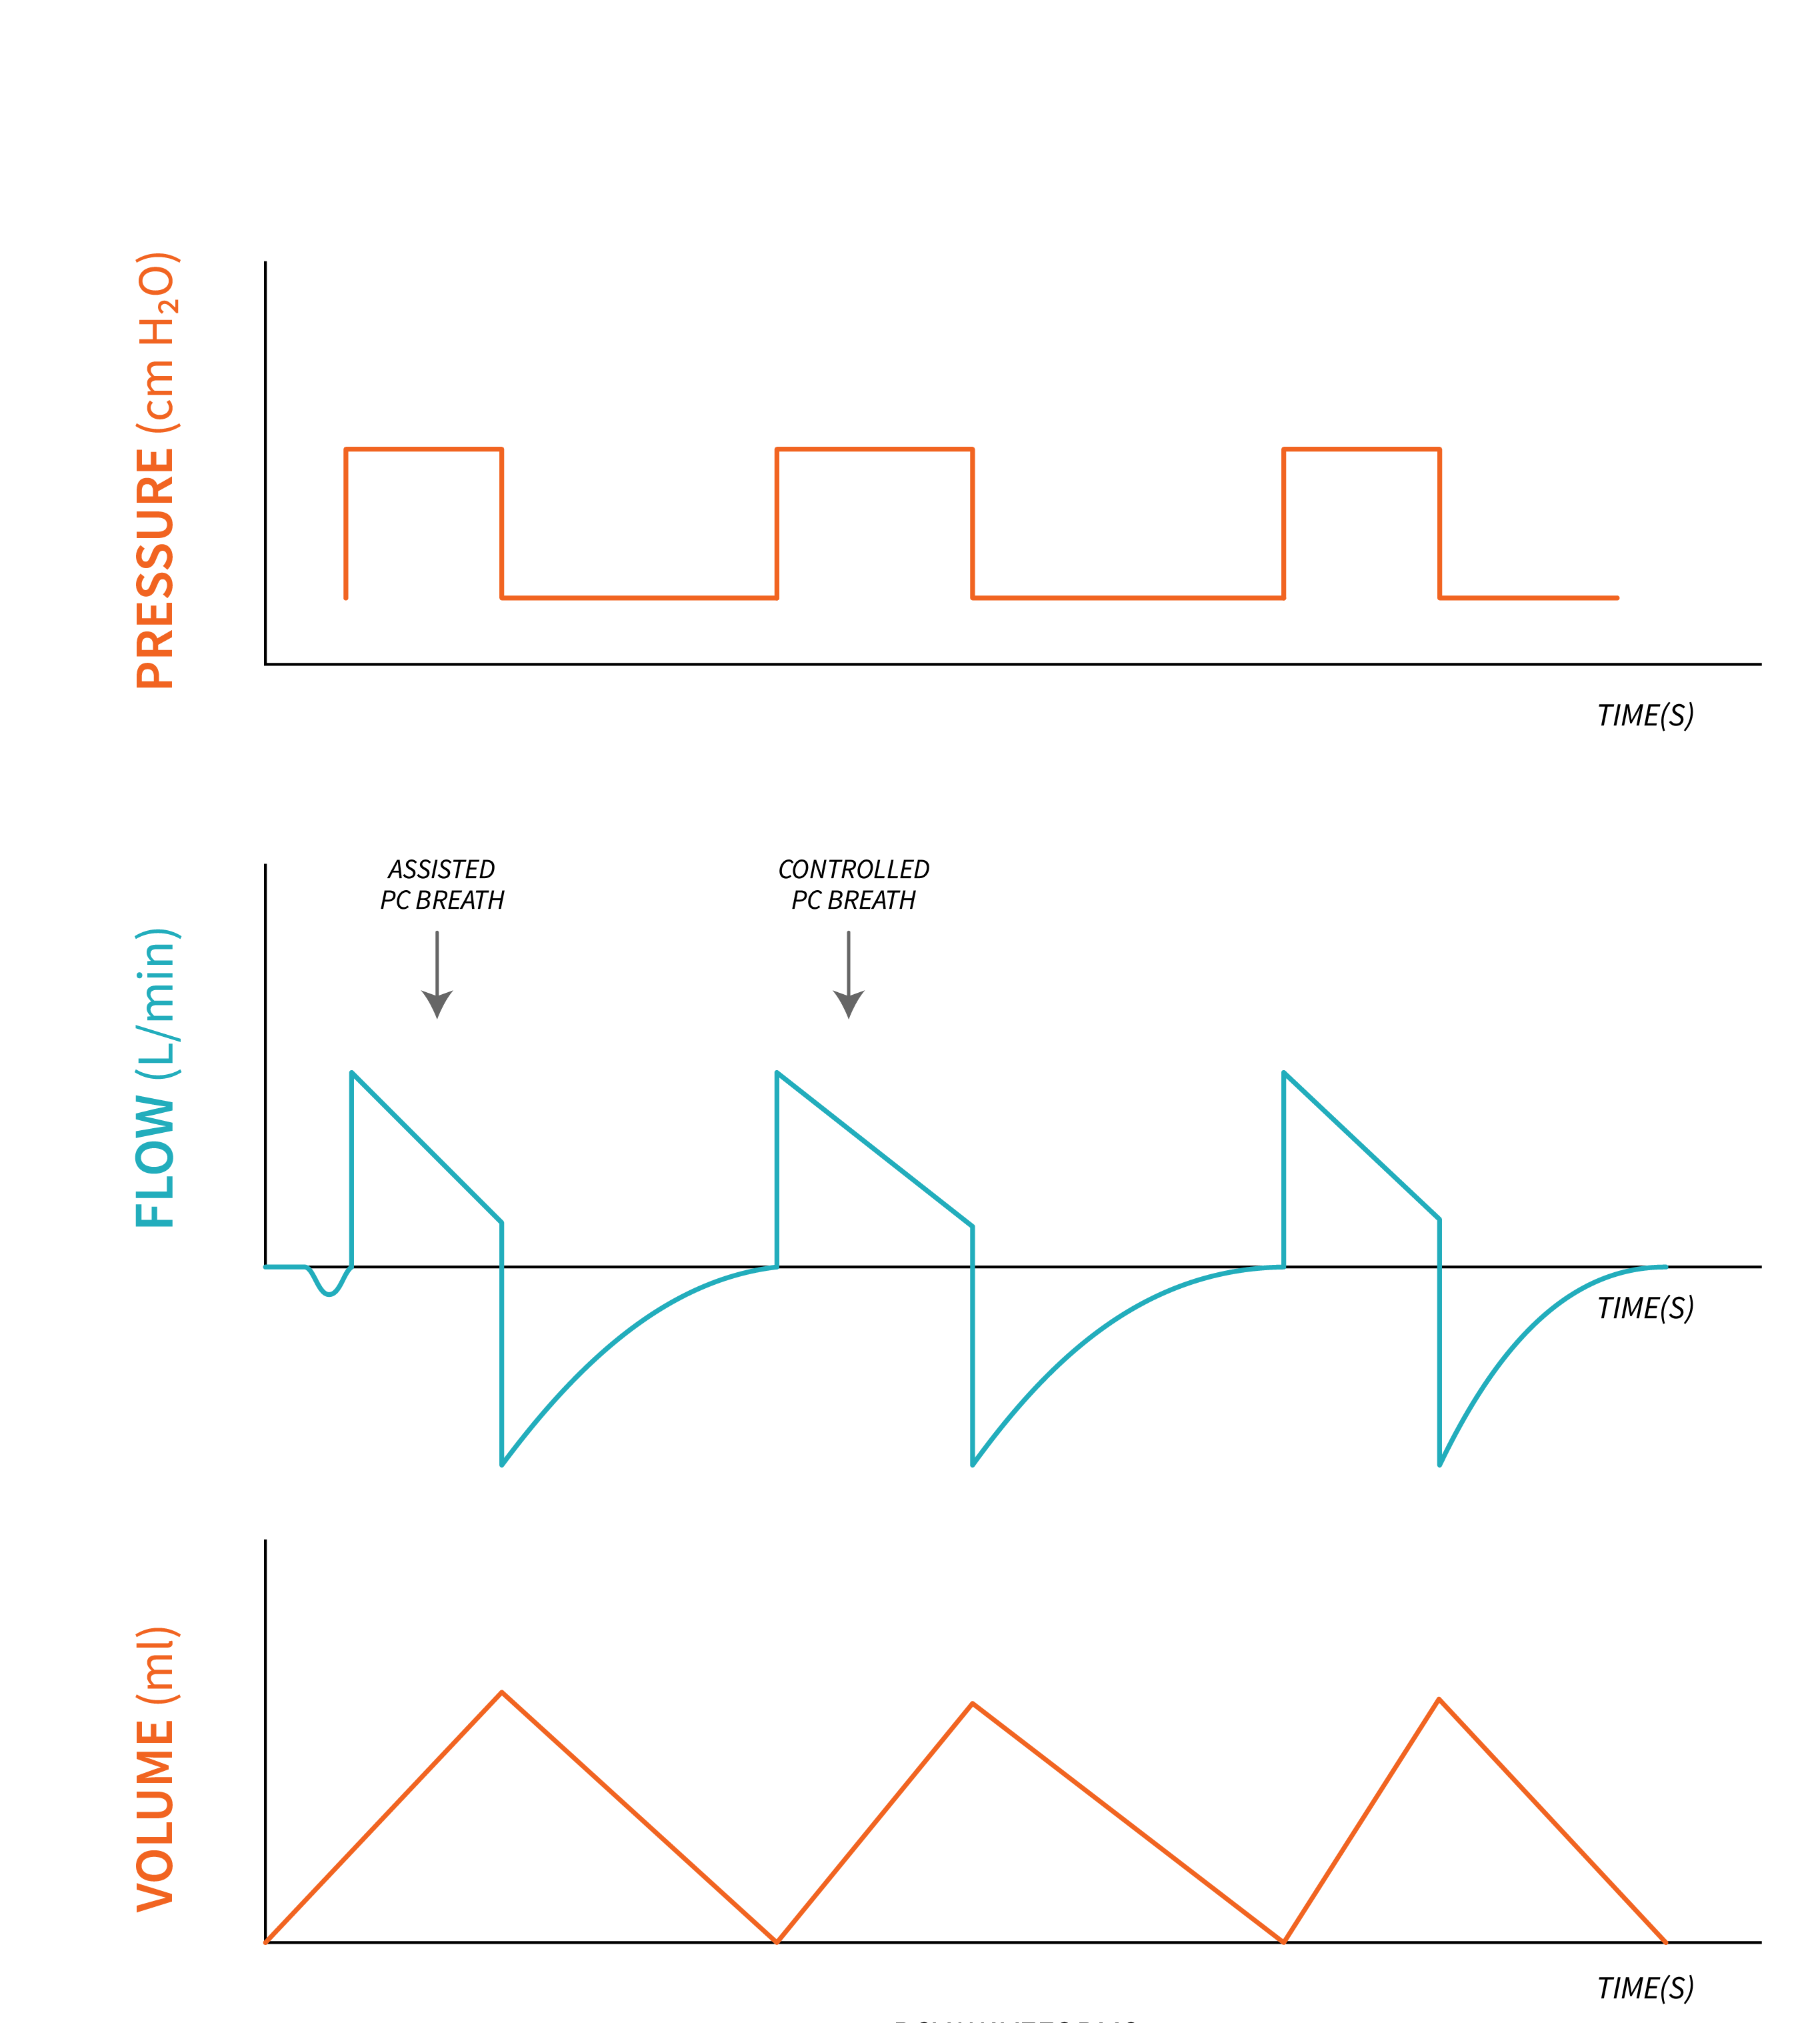 A PCV Waveforms Diagram with pressure, flow and volume. The first breath on the diagram represents an assisted breath and the second represents a controlled PC breath.